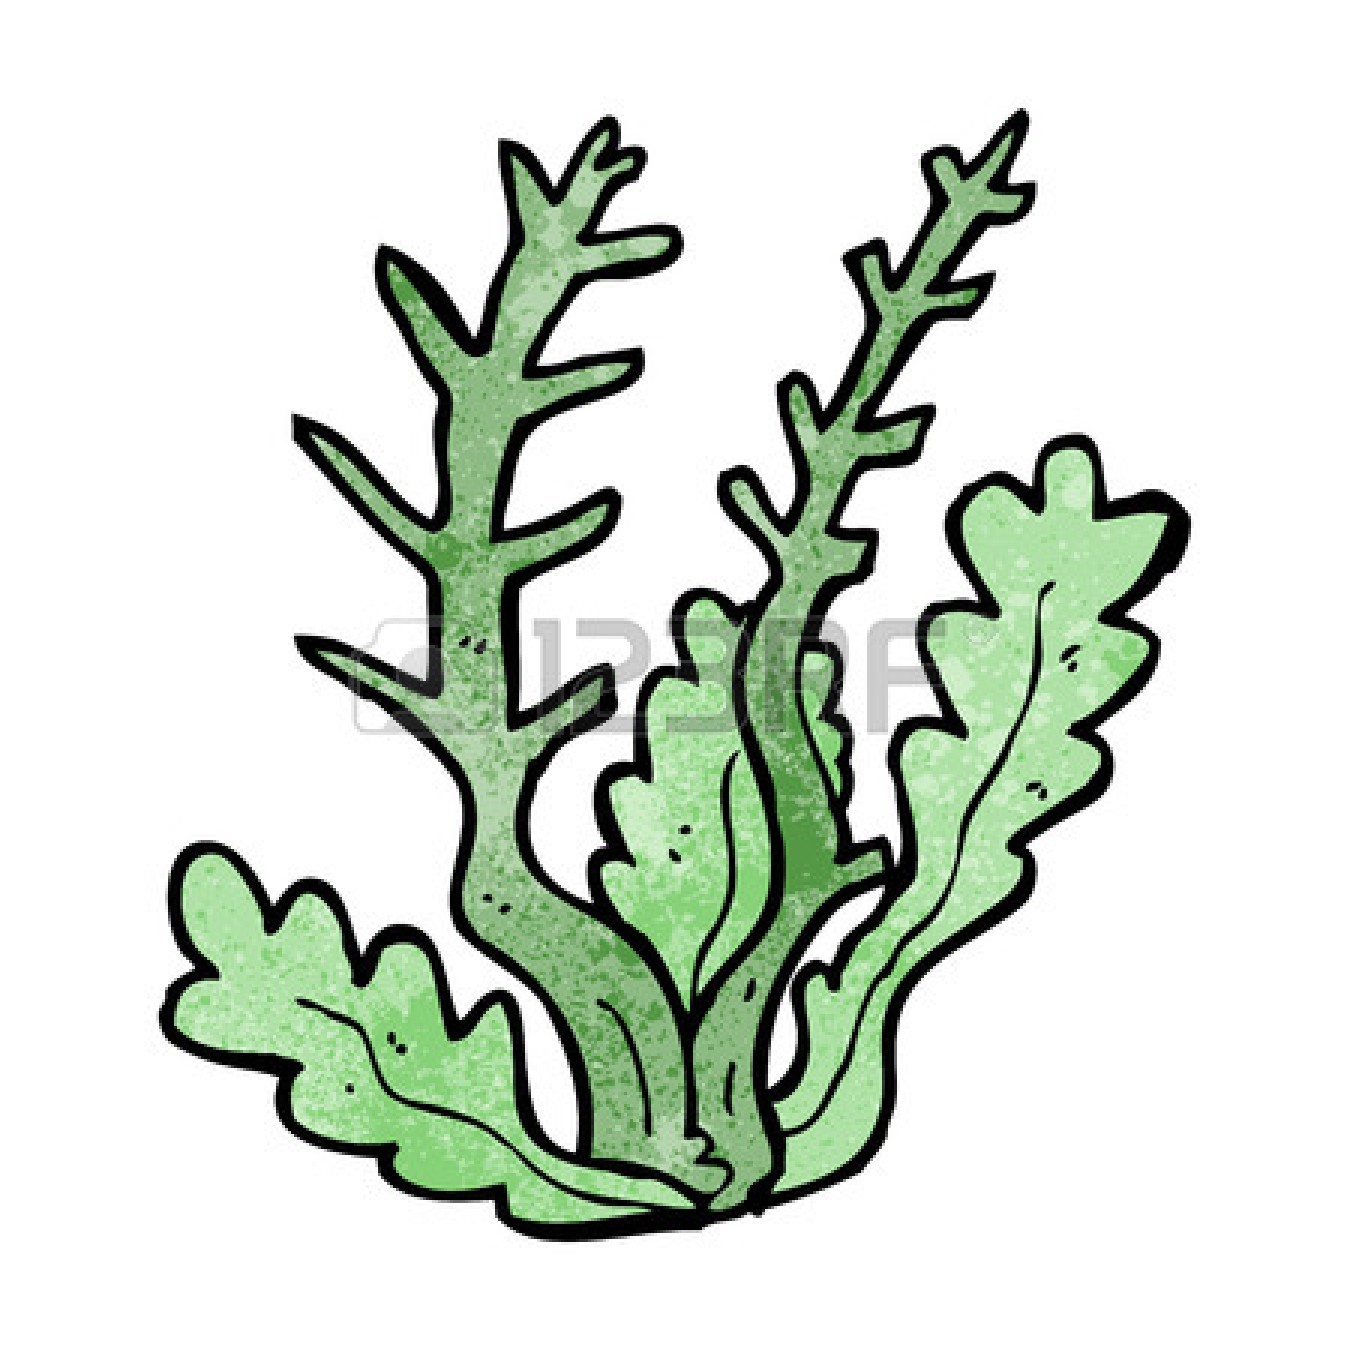 how to draw cartoon coral